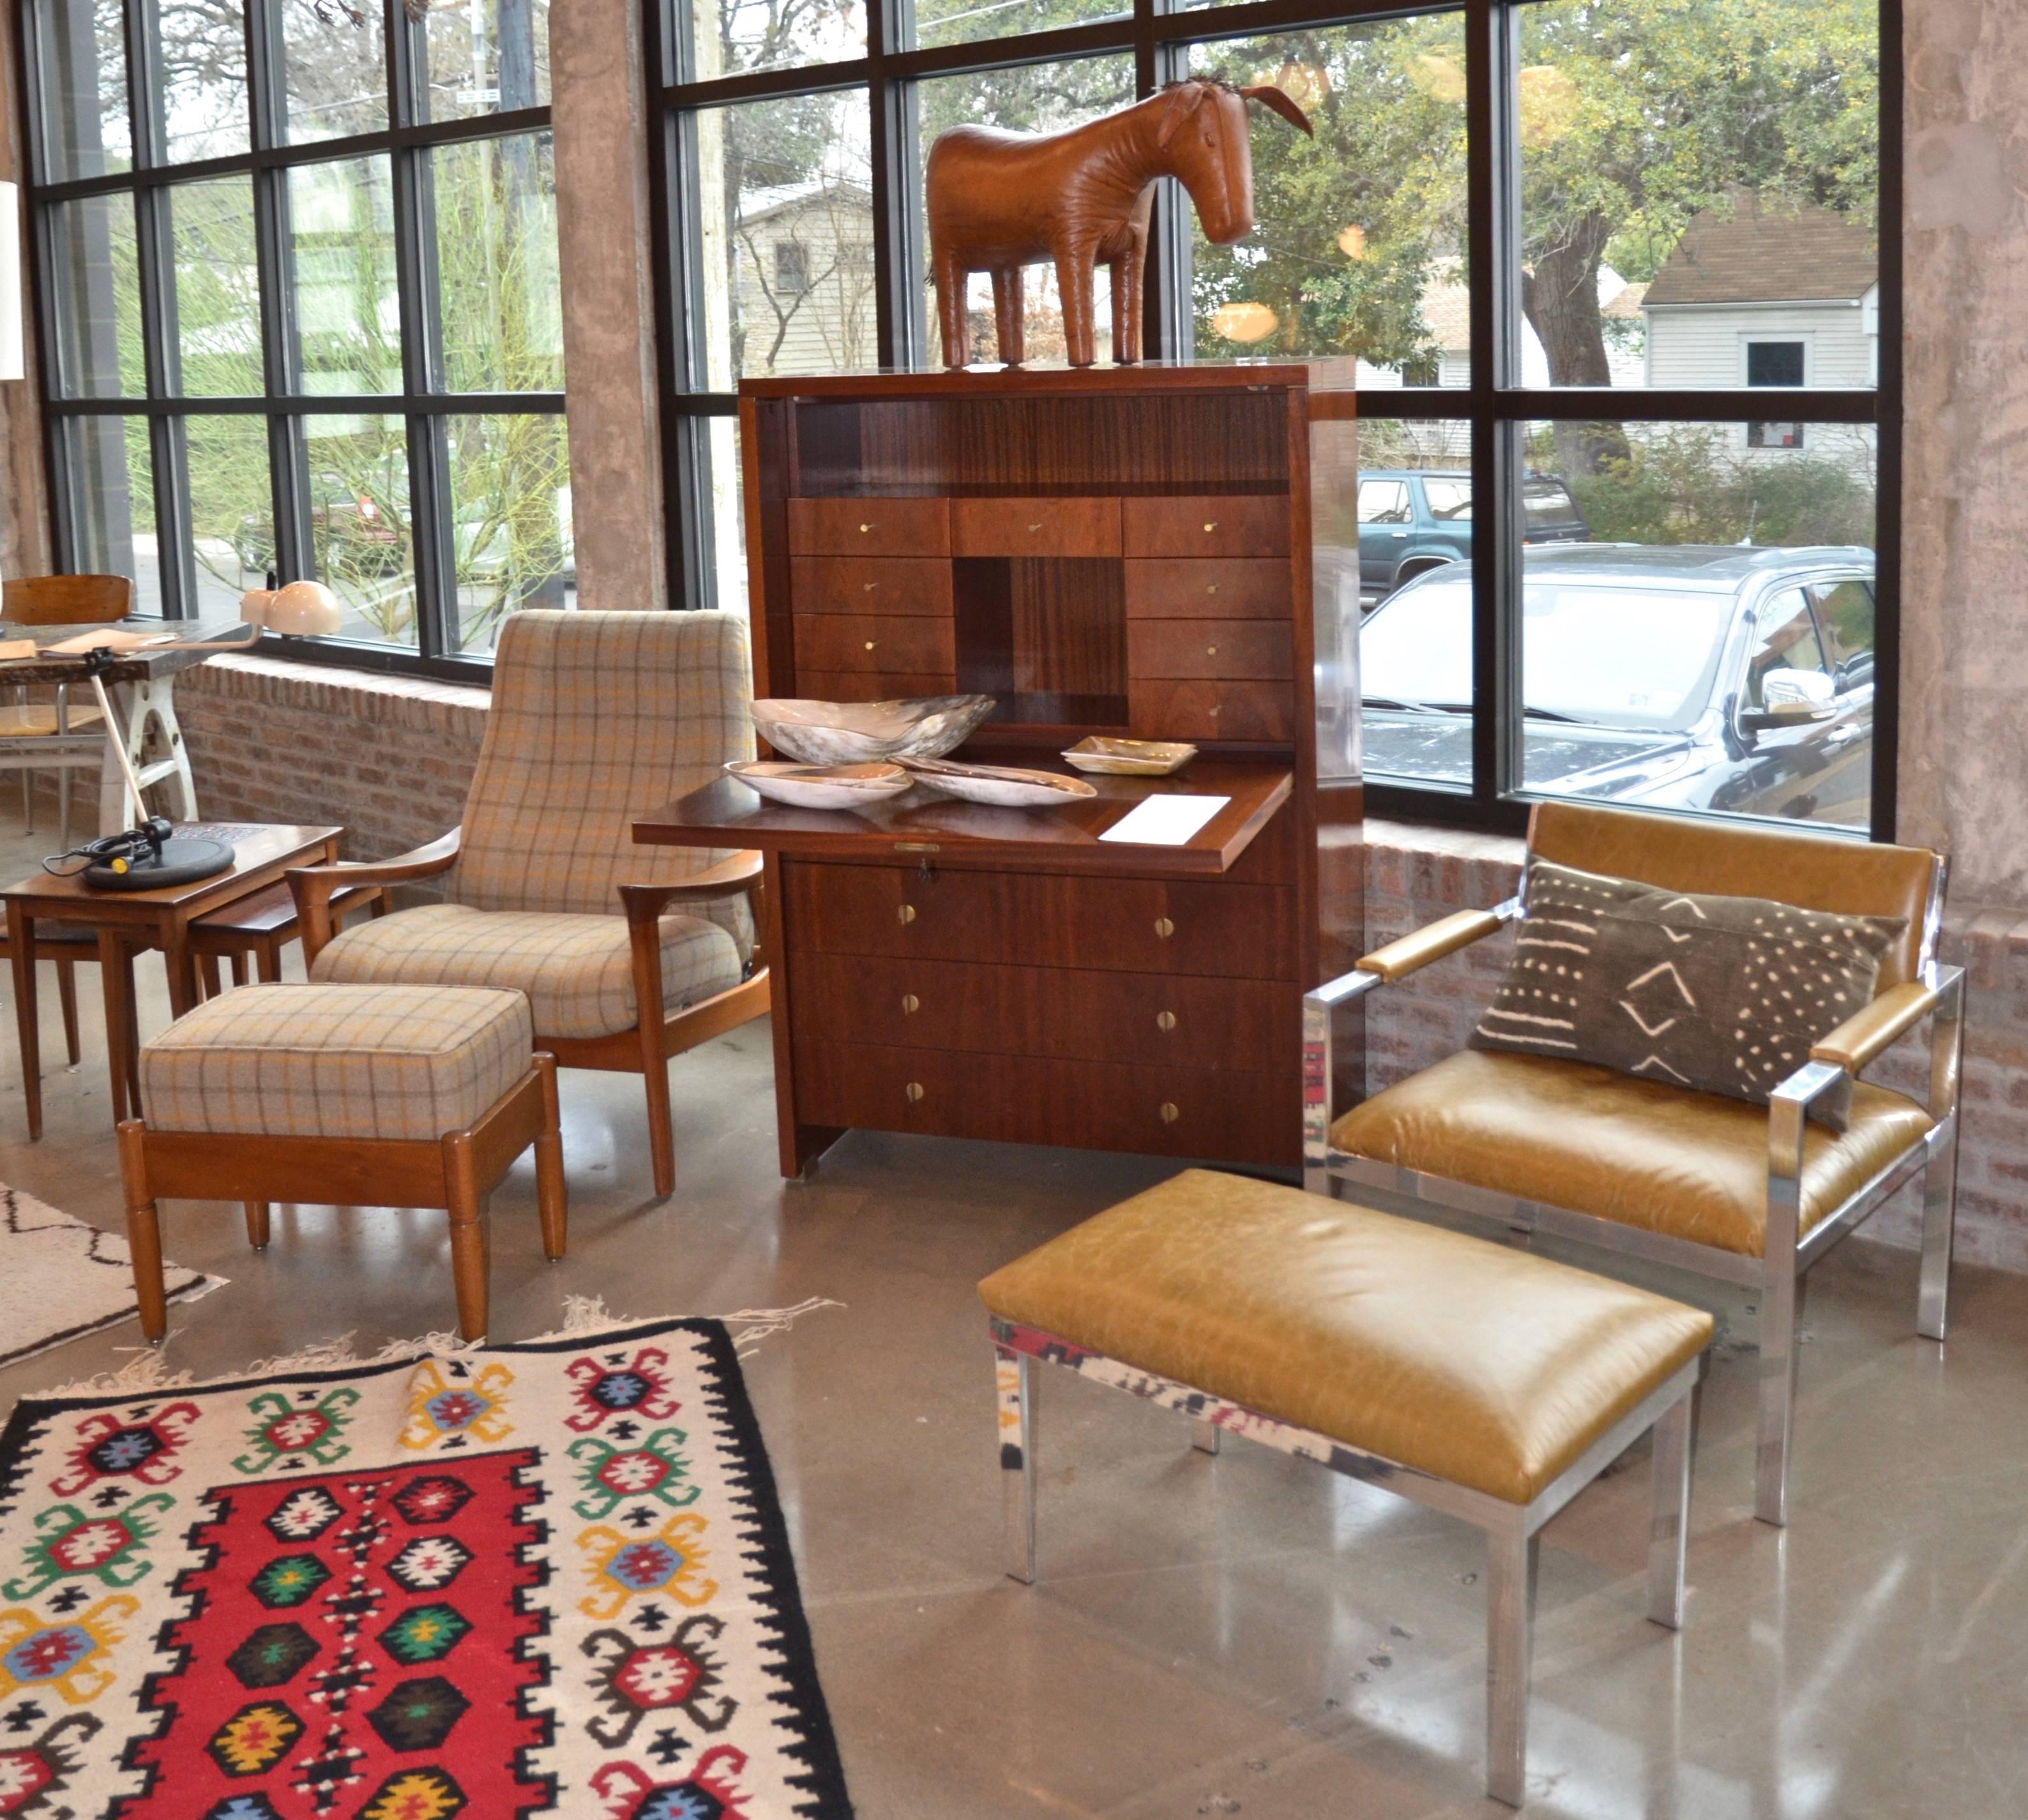 Polished aluminium/chrome frame lounge chair and ottoman with new olive colored leather upholstery. In the style of Milo Baughman and Harvey Probber, 1970s. As sturdy and comfortable as it is good looking.